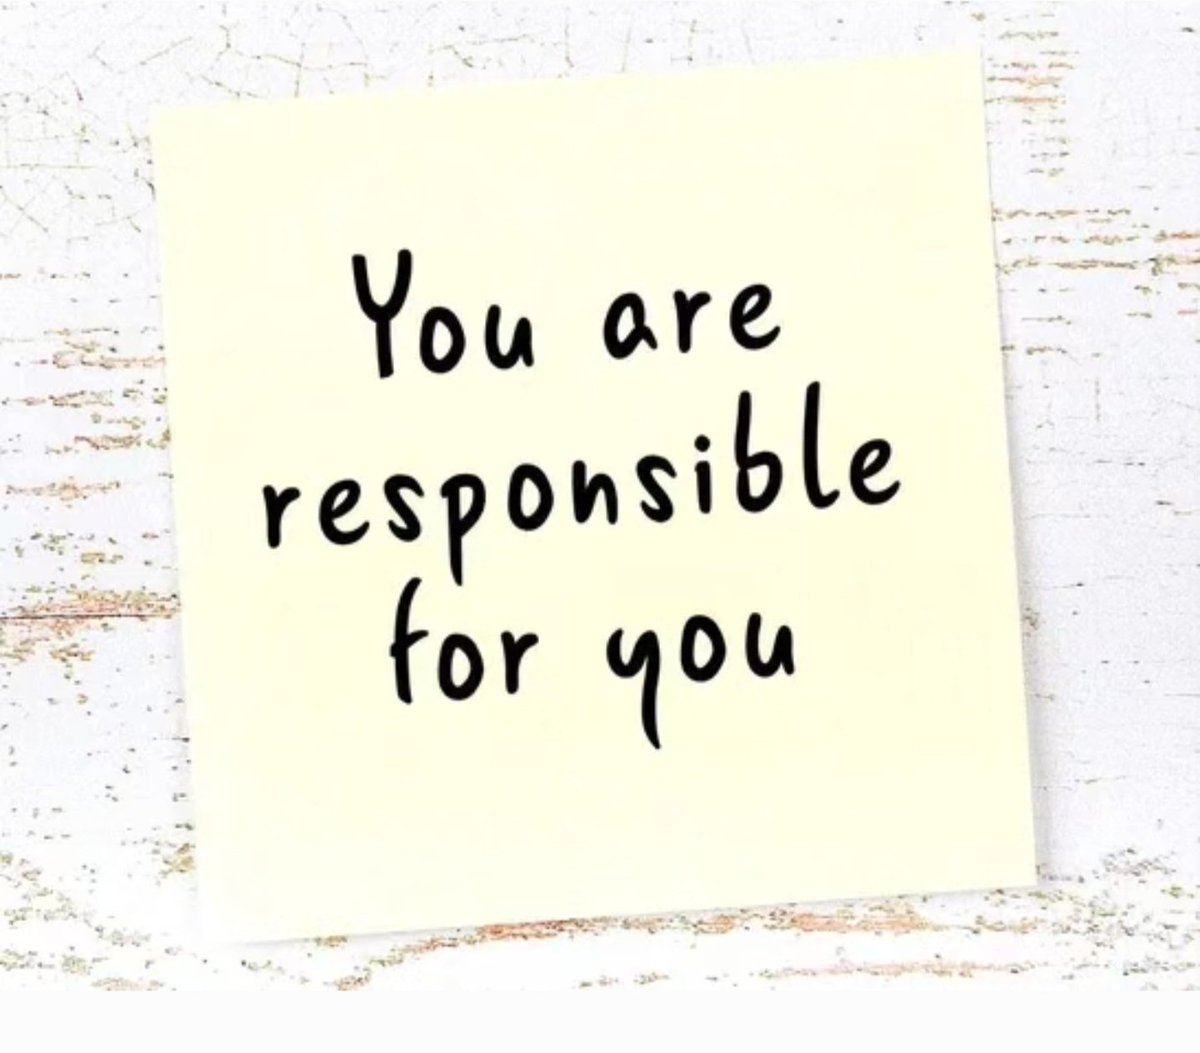 Good morning! There is no escaping being responsible,  Responsibility is yours to accept. You are responsible. #acceptresponsibility #responsibility #beresponsible #beresponsible #helpinthehouse #Solutionist #iamaningredient #JusticeGeneral